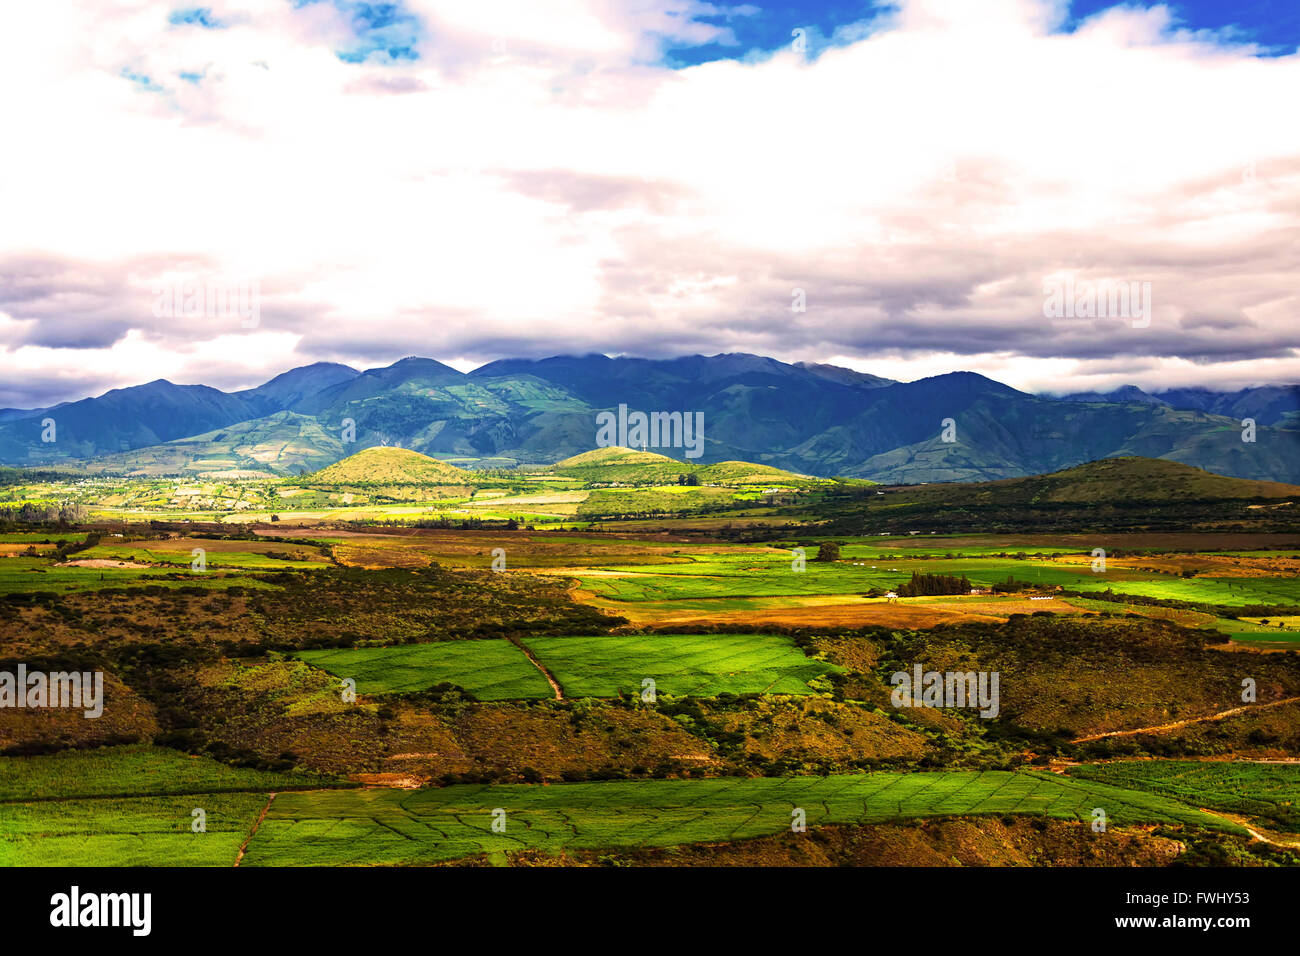 Cultivated Land In The Foothills Of The Andean Mountains, Ecuador, South America Stock Photo